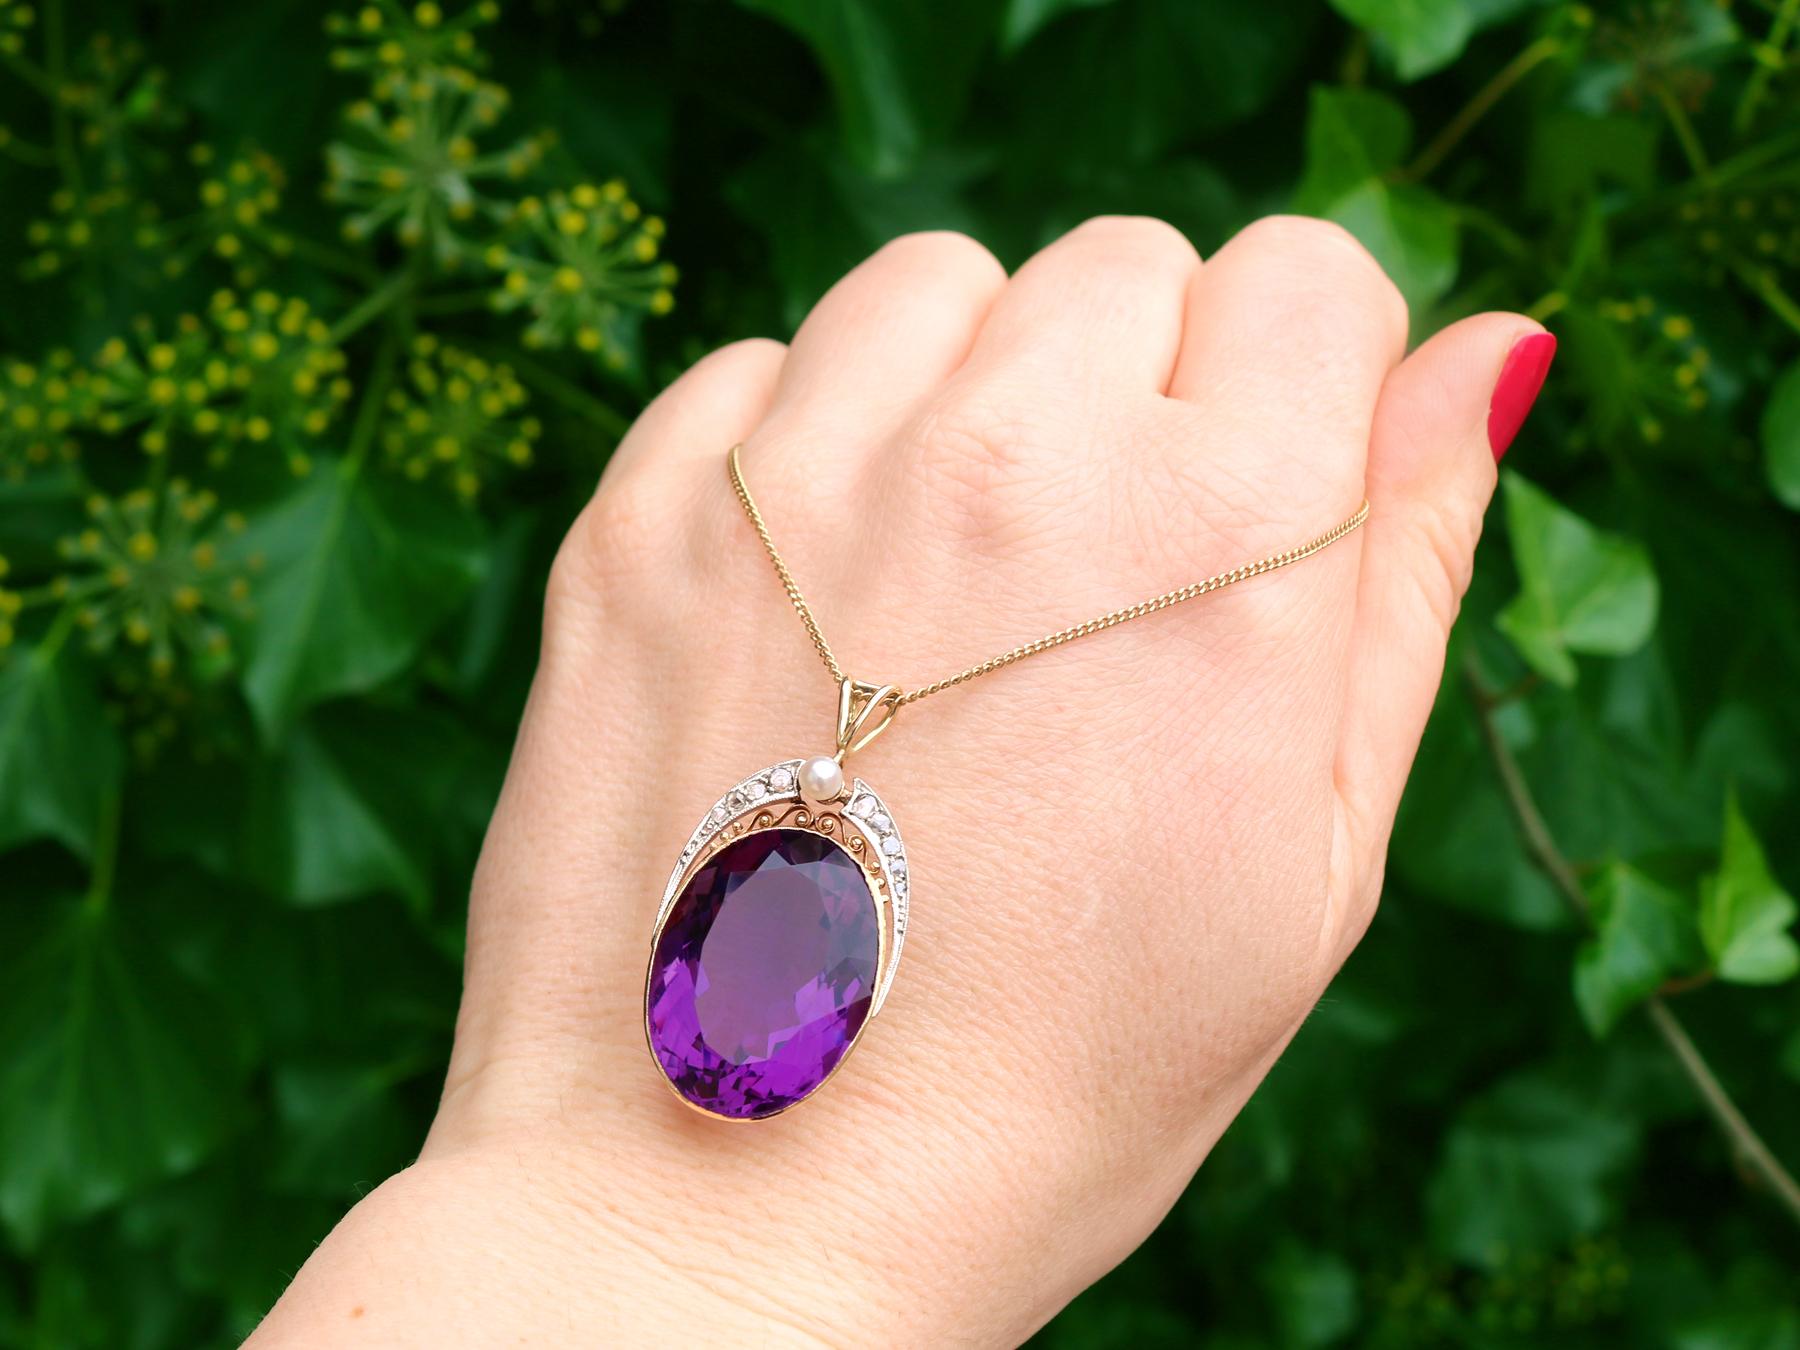 A stunning, fine and impressive 32.42 carat amethyst, 0.25 carat diamond and cultured pearl, 14k yellow gold and platinum pendant; part of our diverse vintage jewelry collections

This stunning, fine and impressive oval faceted amethyst pendant has